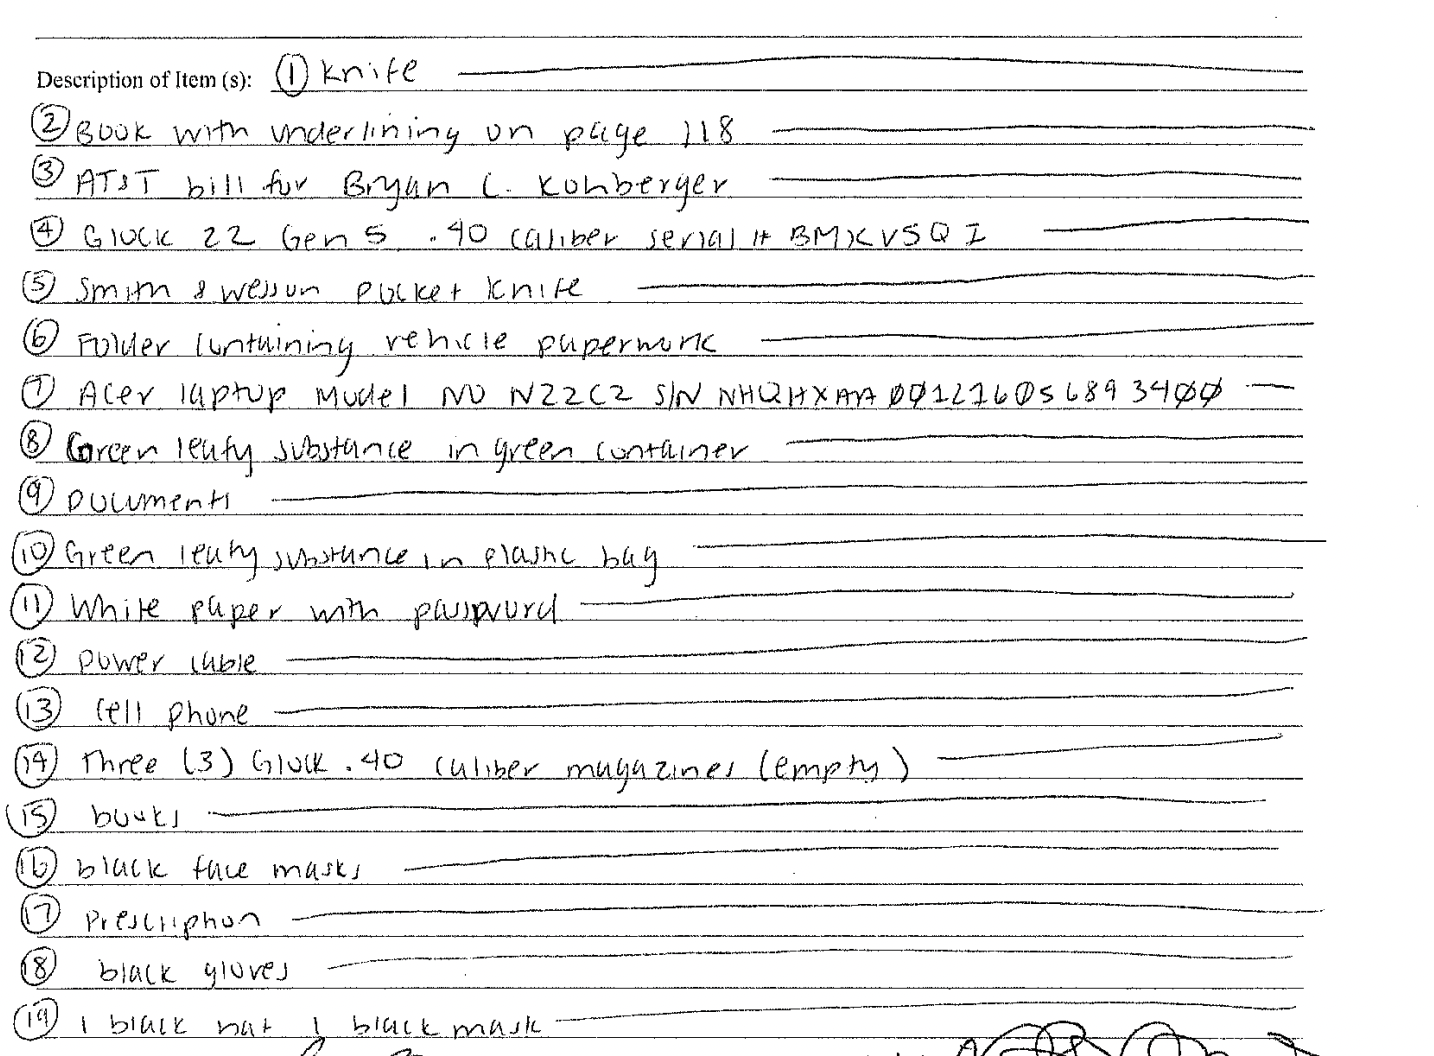 List of items seized adt authorities served a search warrat at Bryan Kohberger’s home